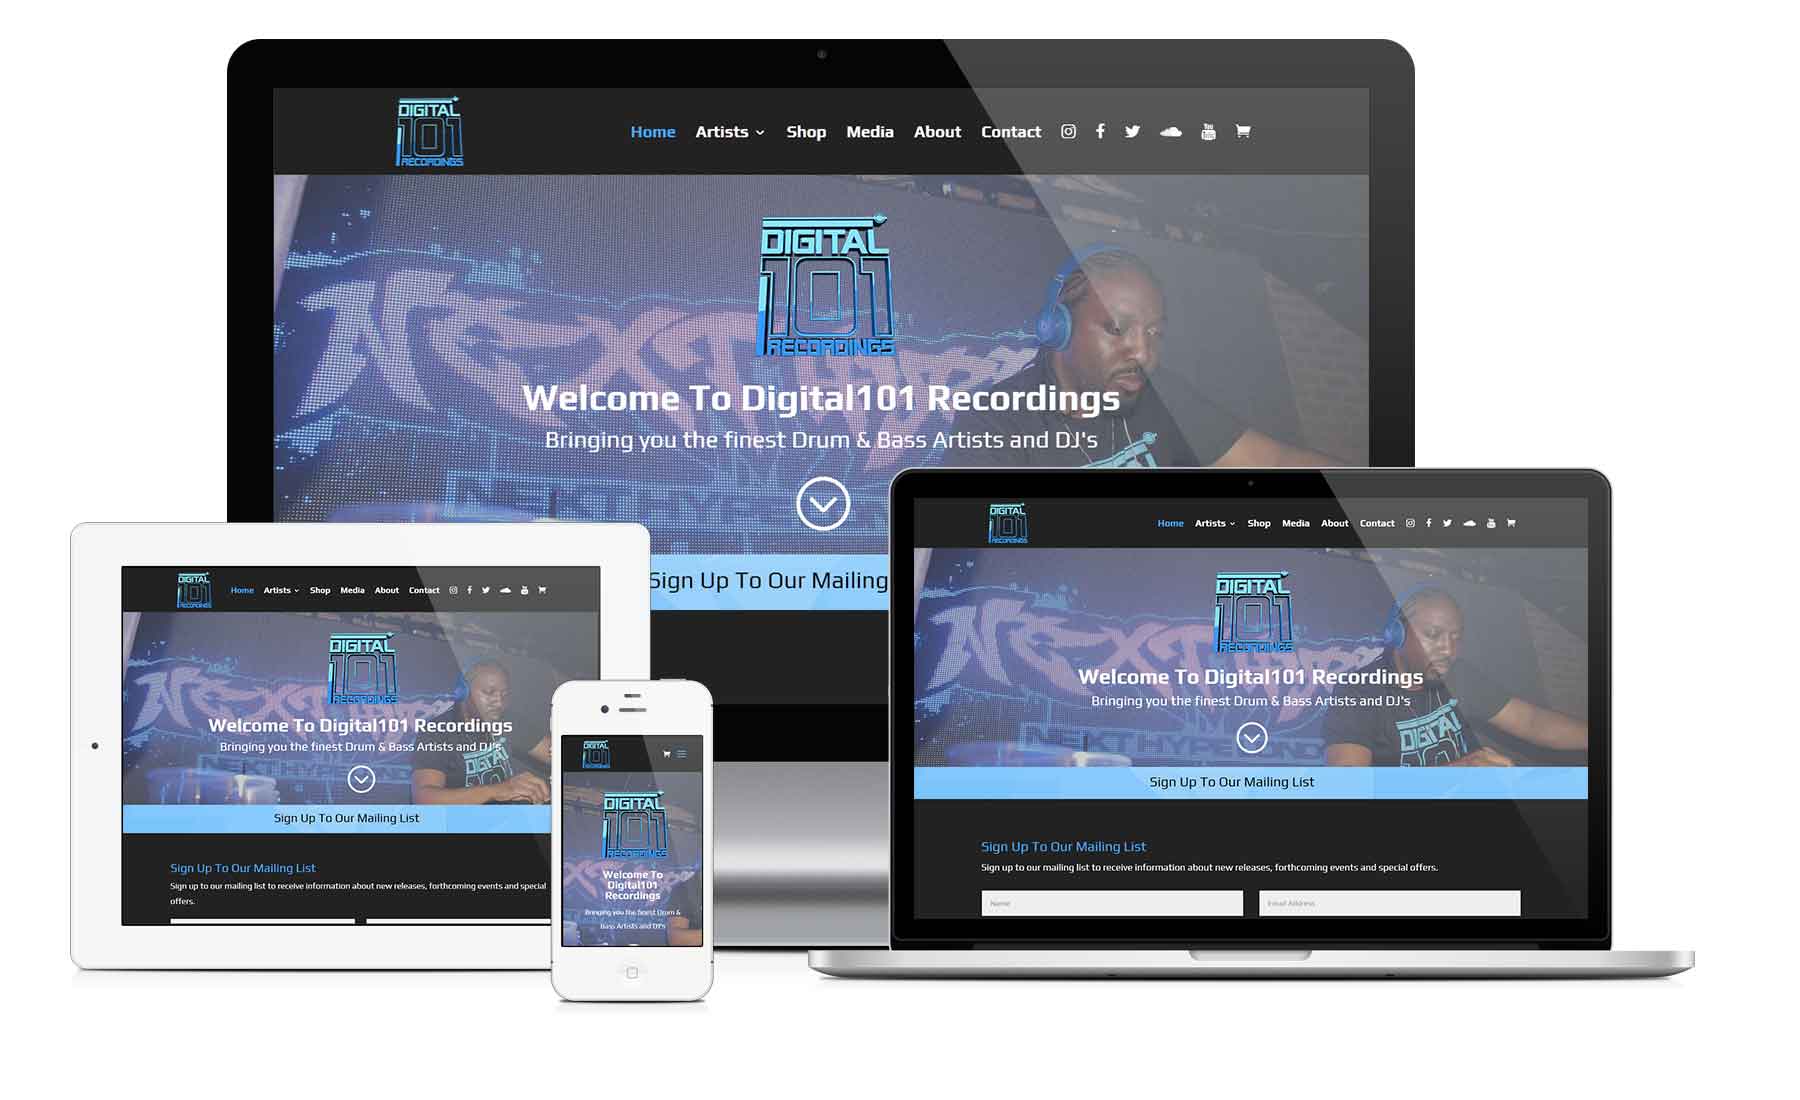 image of the website digital101recordings.com as seen on different devices